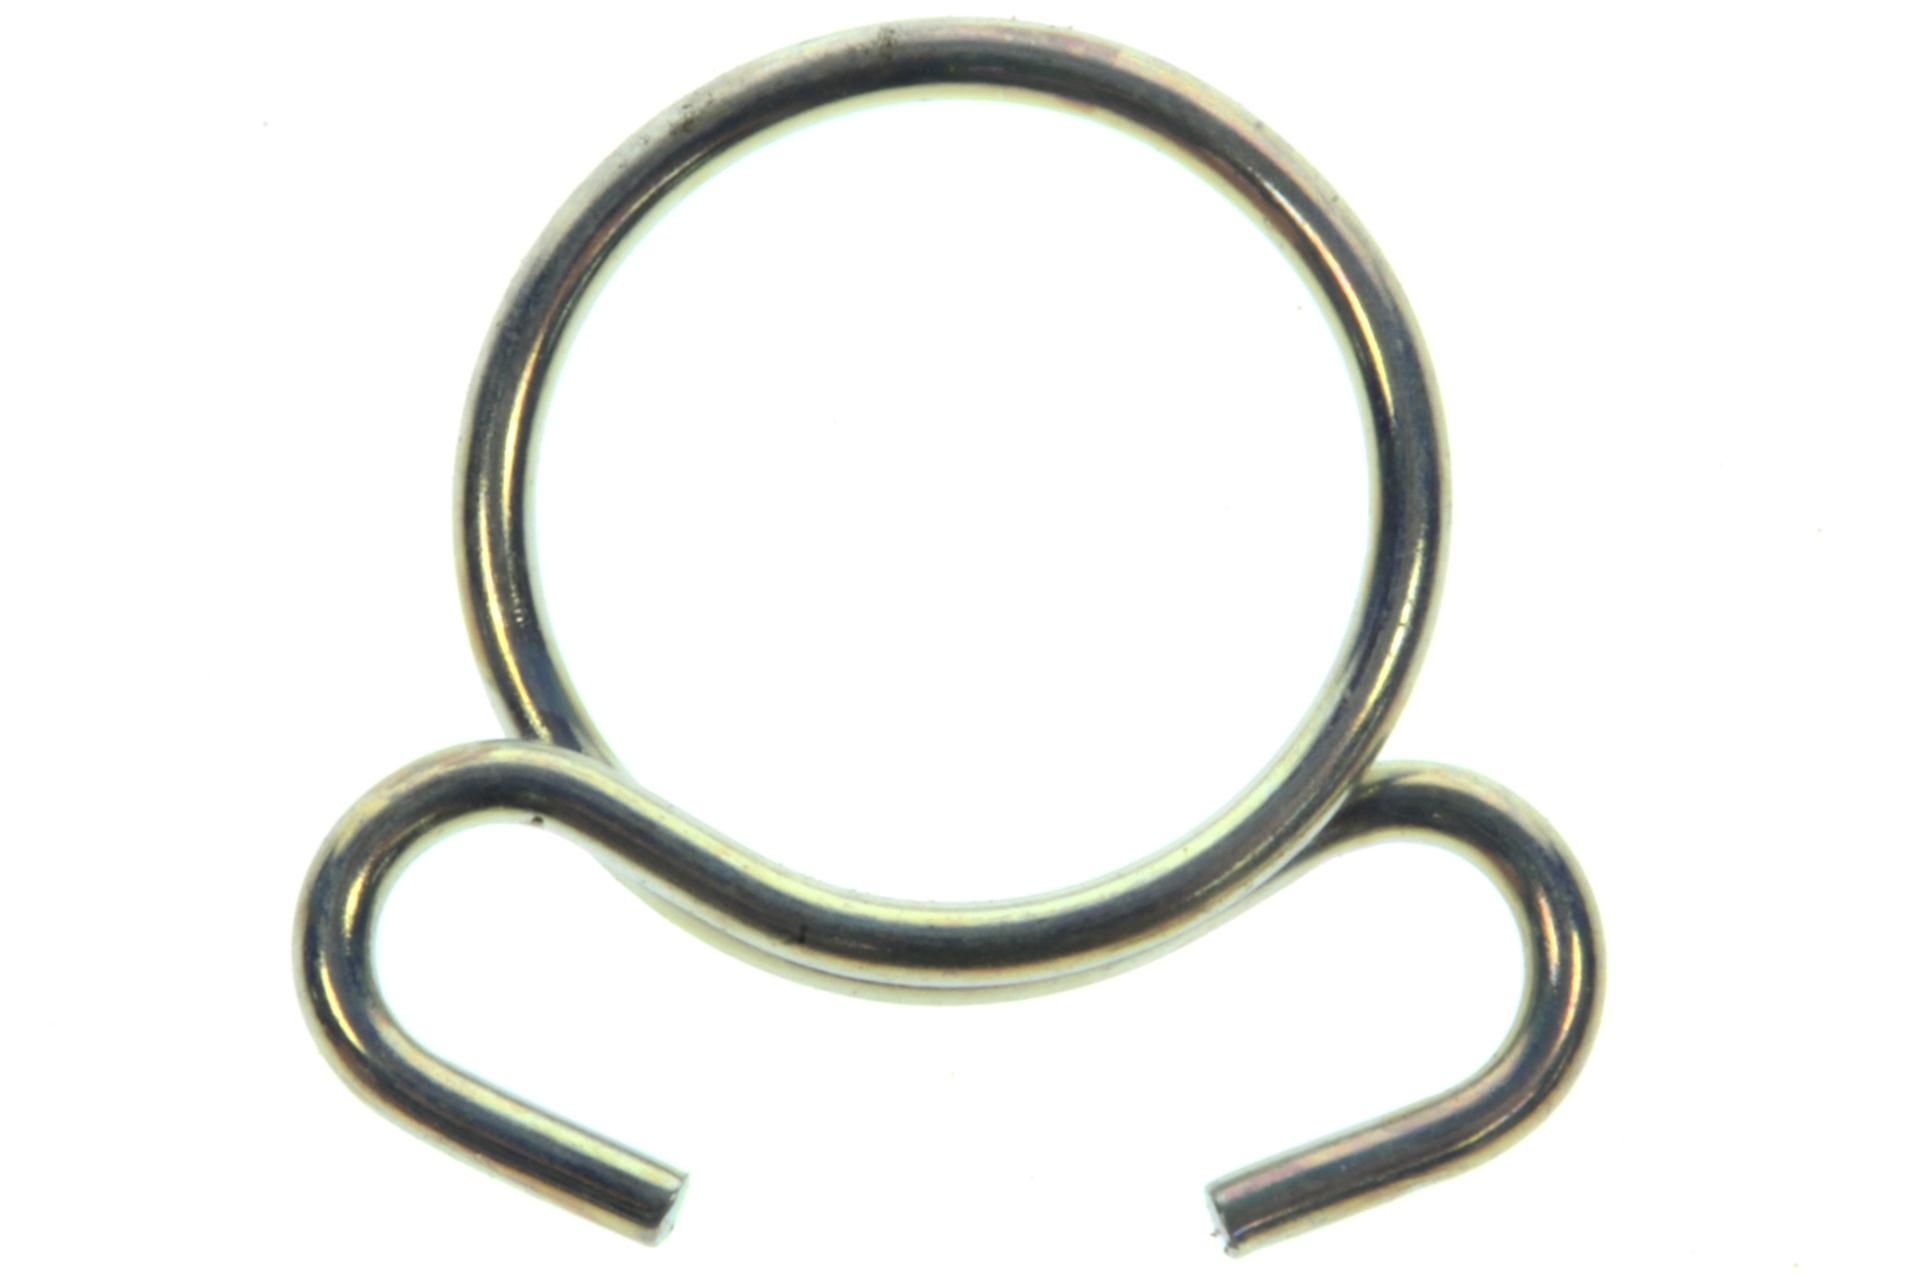 09401-10410 Superseded by 09401-10401 - FUEL HOSE CLAMP